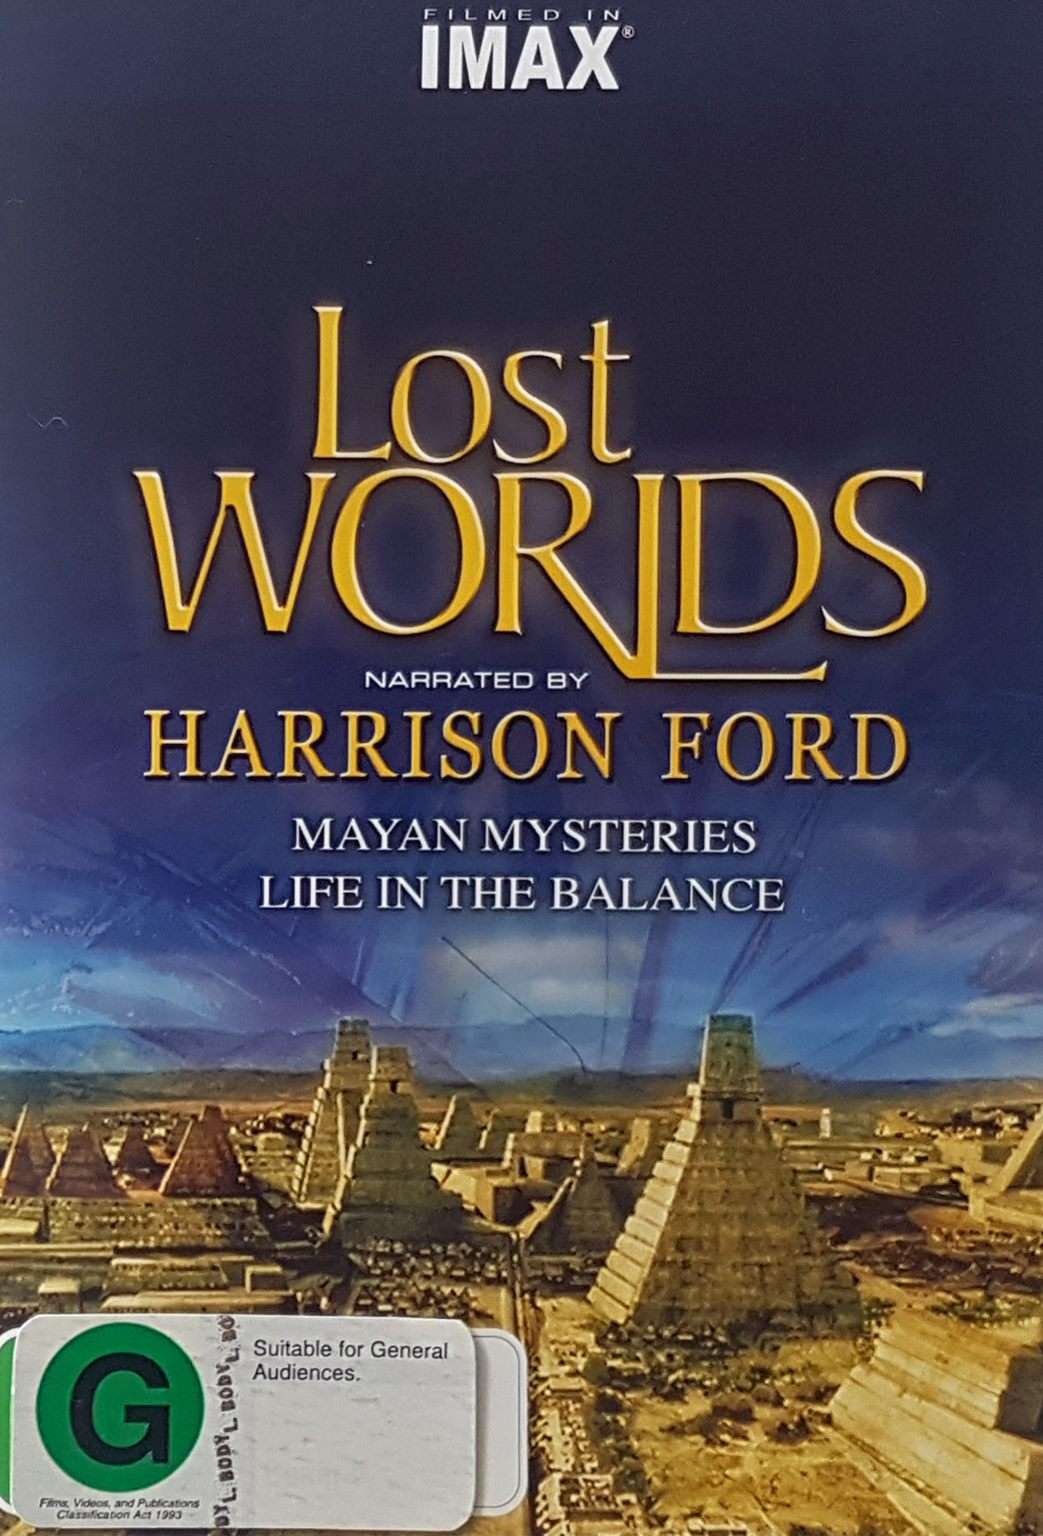 Lost Worlds Mayan Mysteries, Life in the Balance